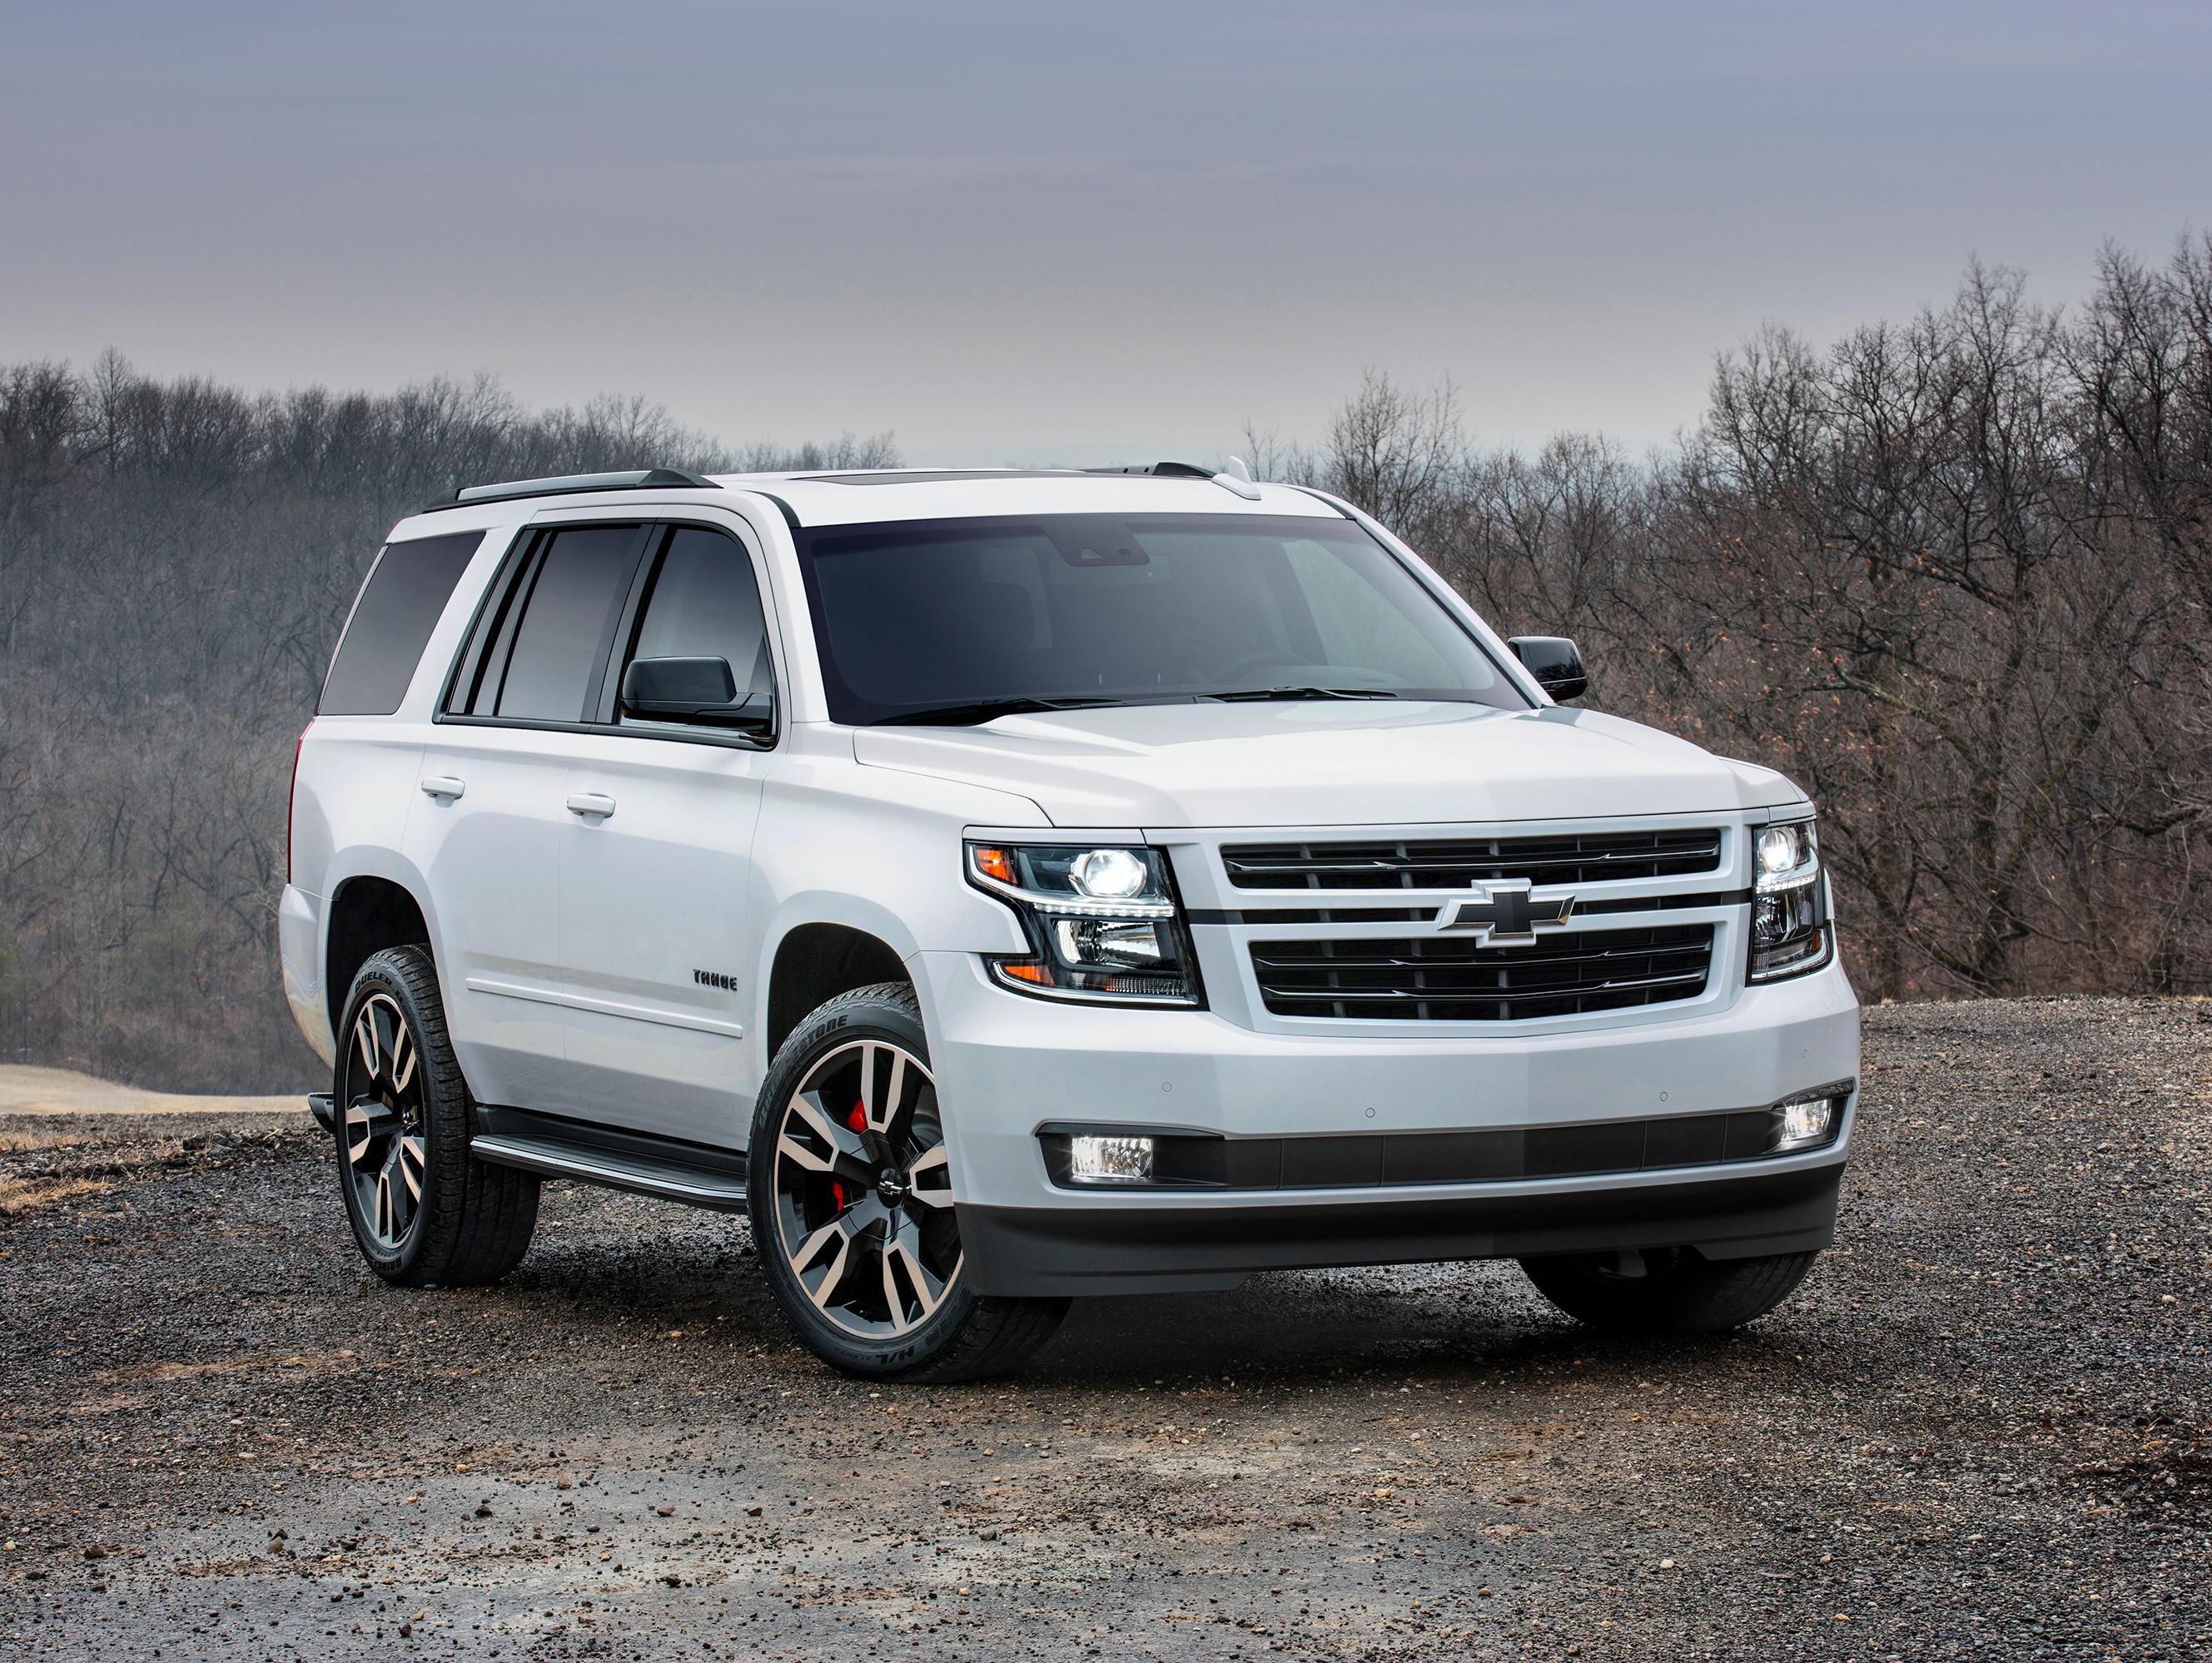 2018 Chevrolet Tahoe RST | Lifestyle | Cloudy Trees